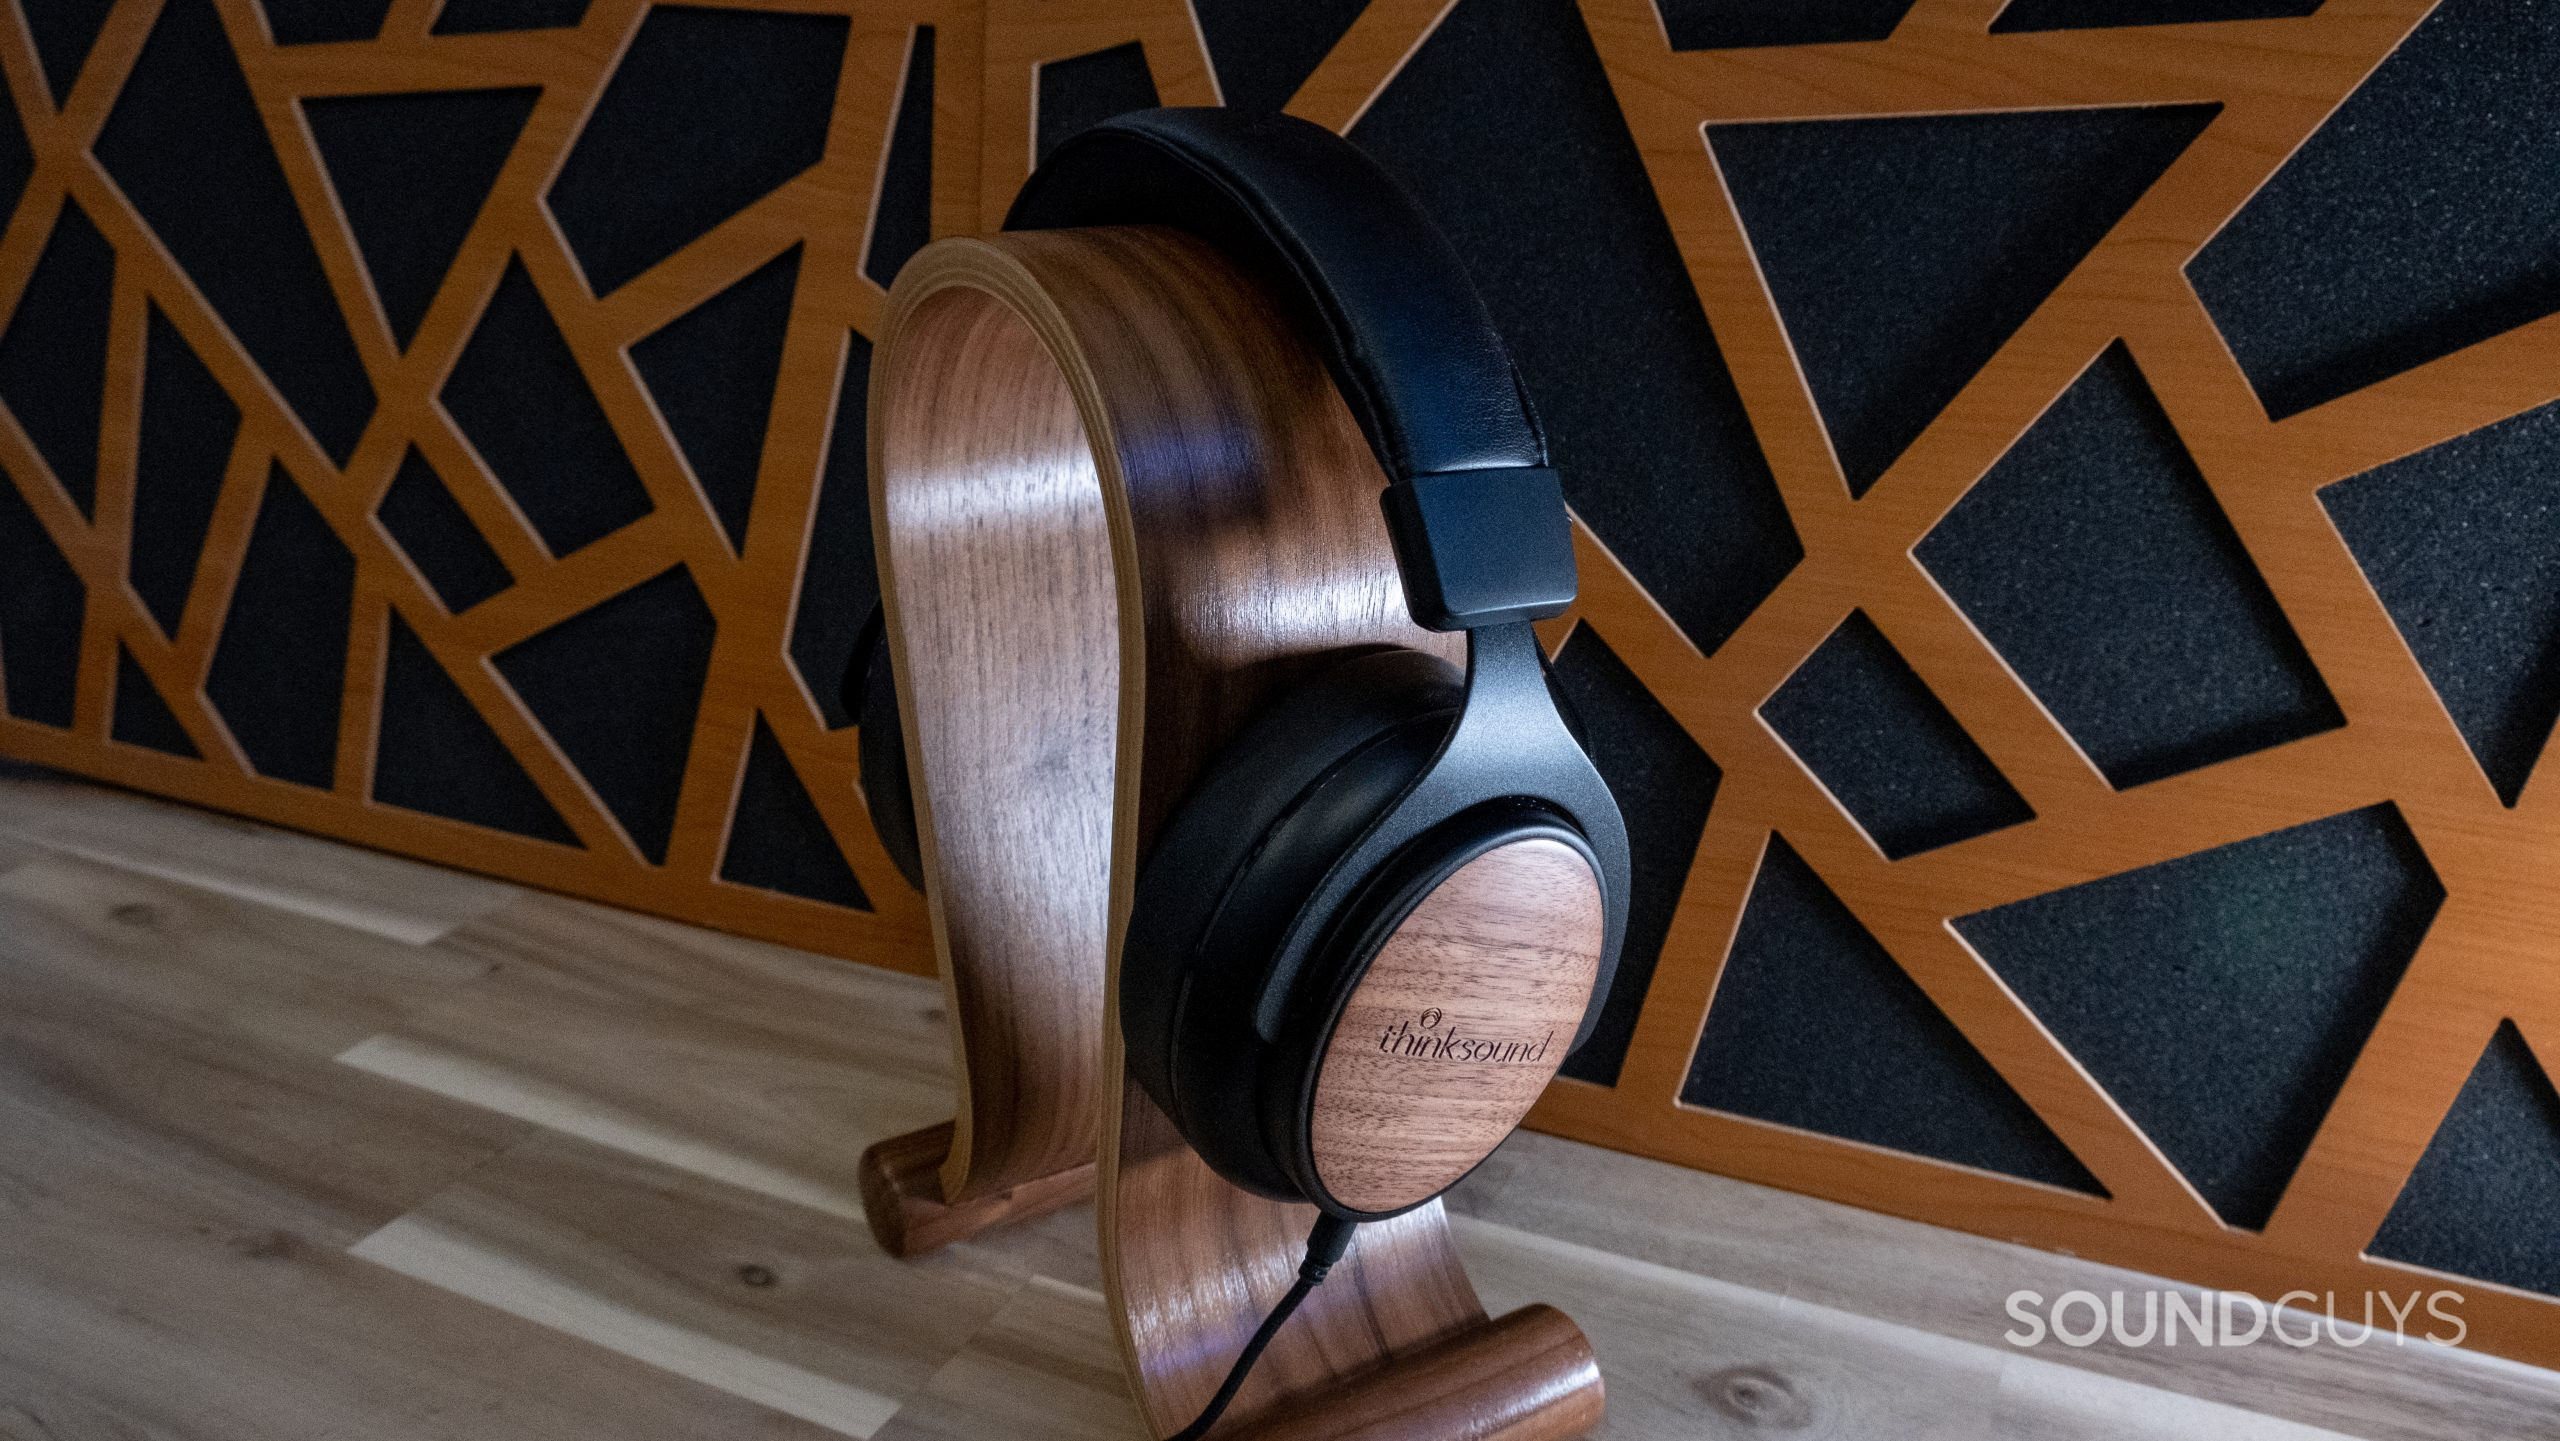 Thinksound ov21 centered and fitted over a wood headphone stand with acoustic panels in the background.